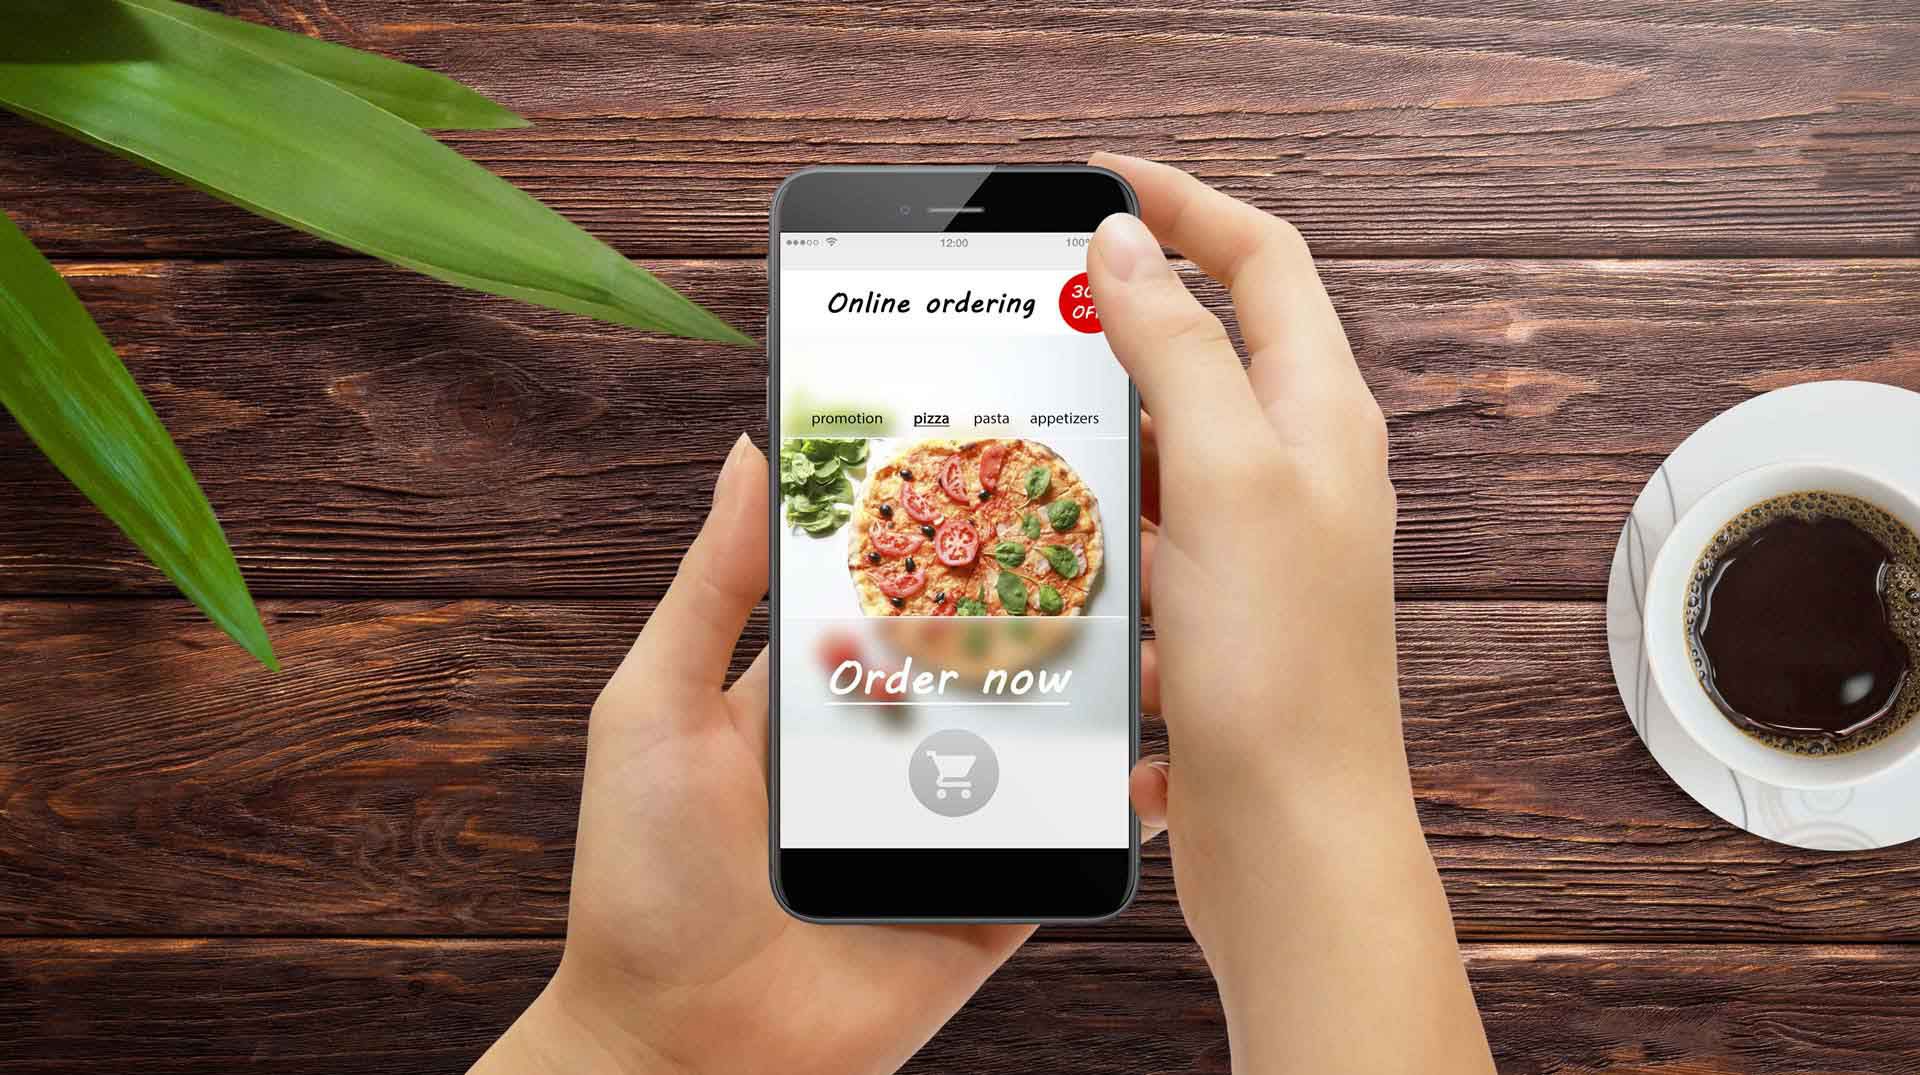 Two hands holding a mobile phone that is displaying a pizza ordering application onscreen